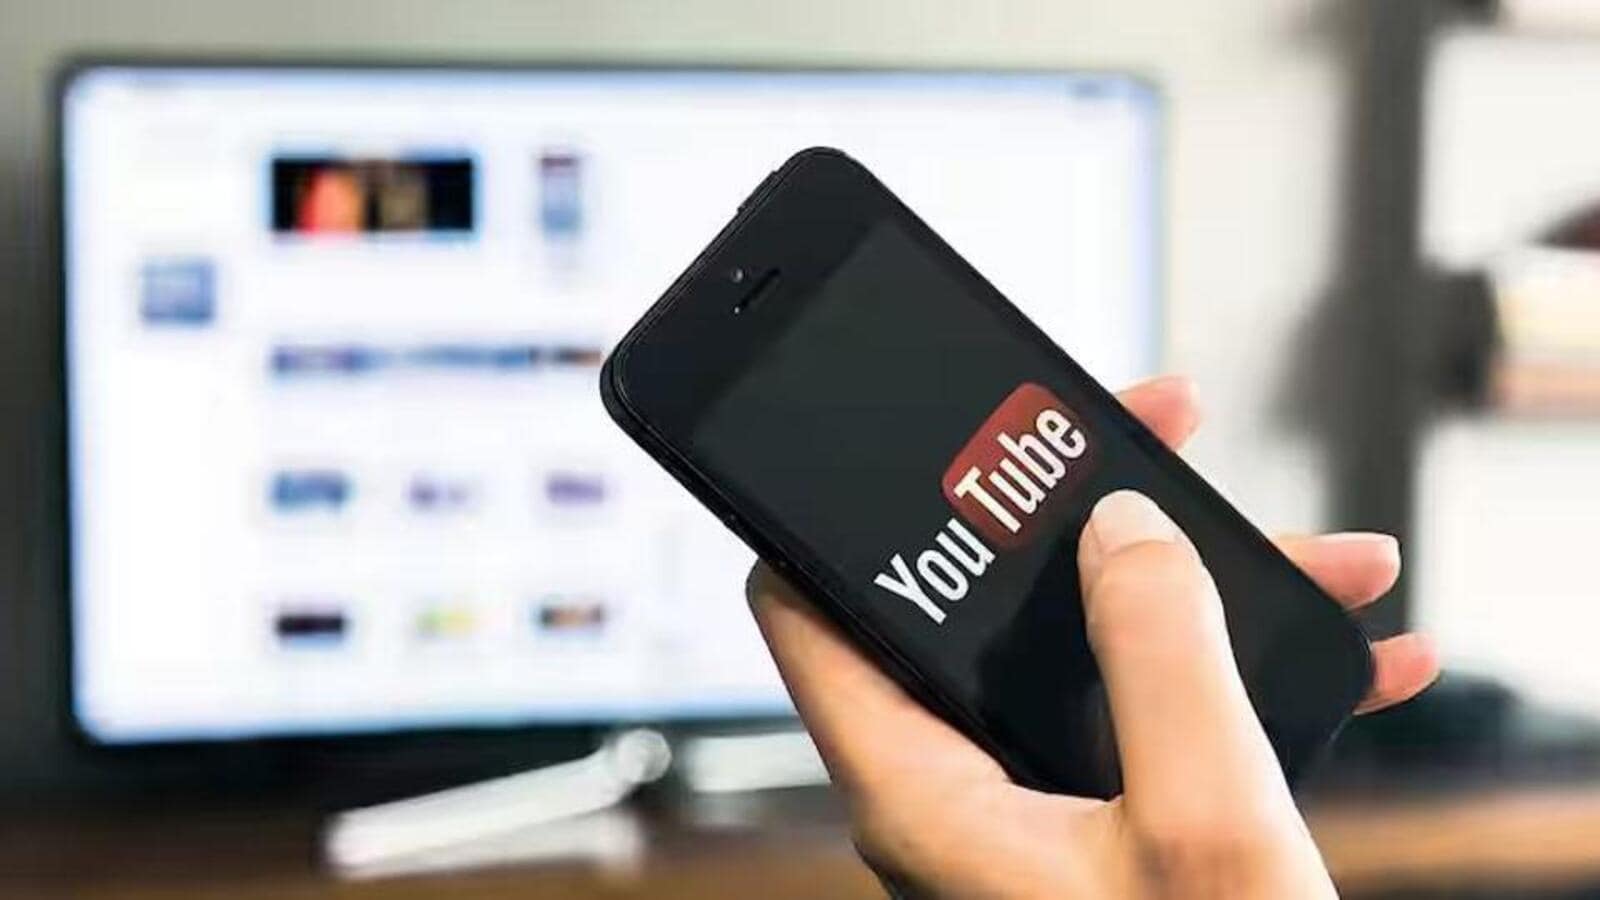 ‘Remove child sexual abuse material’: India warns X, YouTube, Telegram | Latest News India